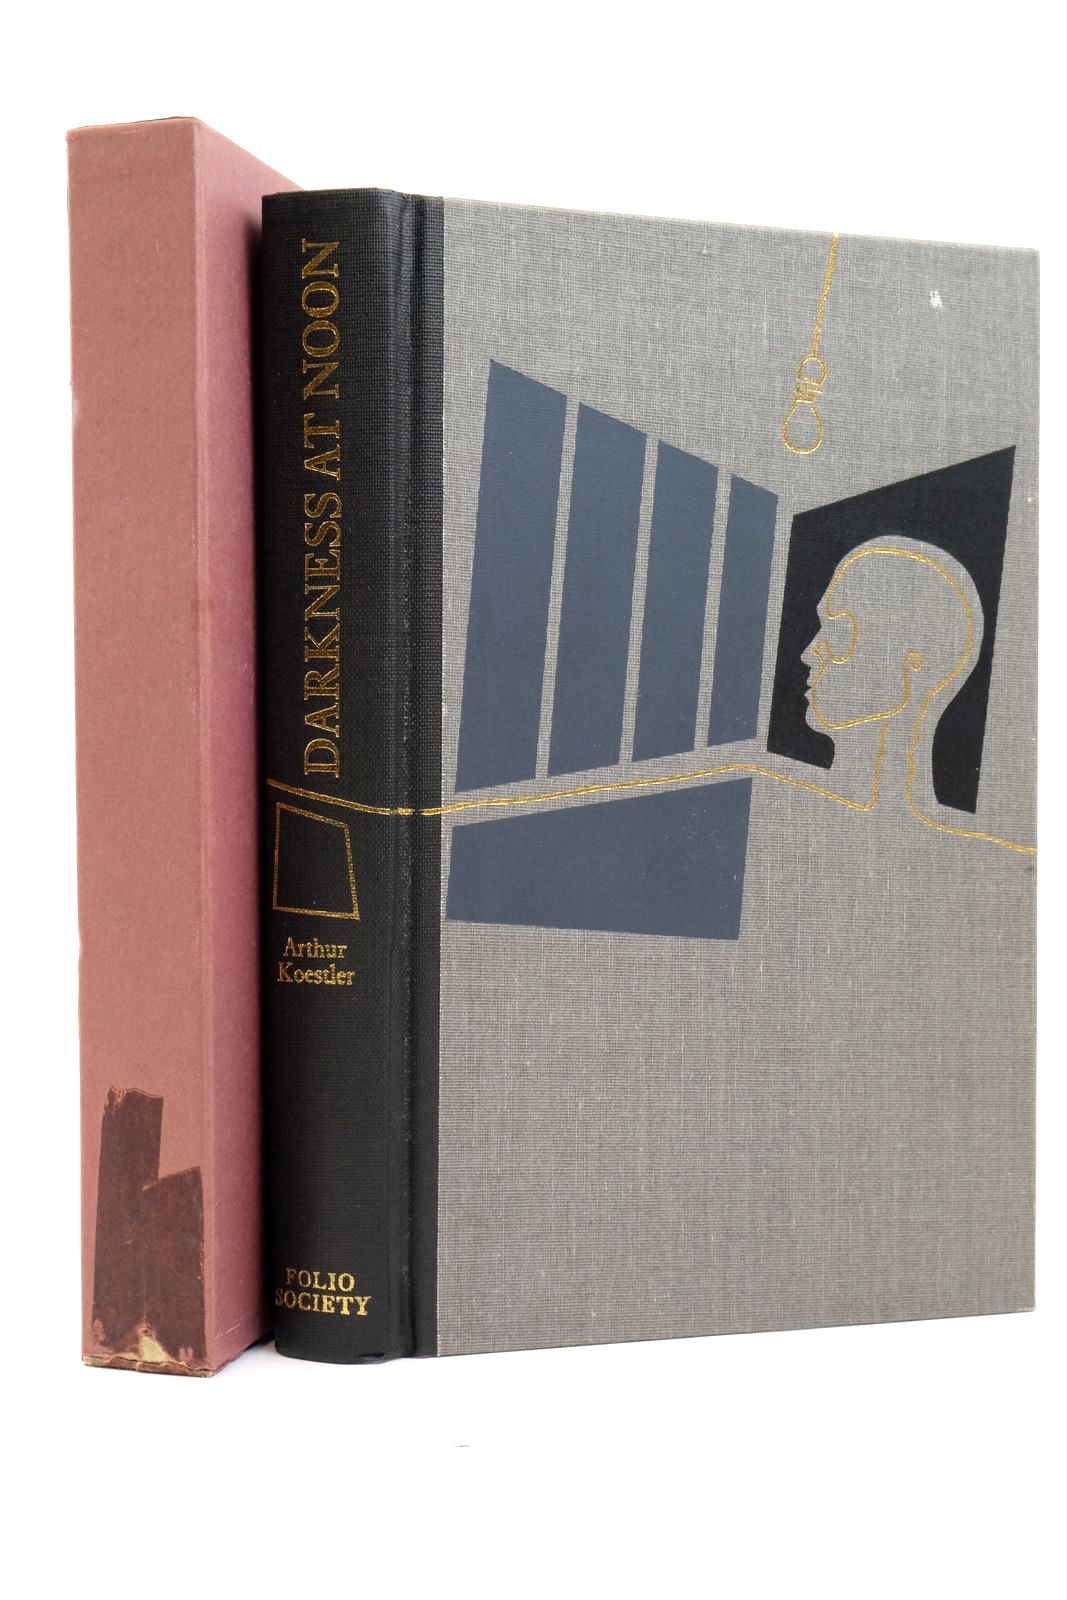 Photo of DARKNESS AT NOON written by Koestler, Arthur illustrated by Buday, George published by Folio Society (STOCK CODE: 2138202)  for sale by Stella & Rose's Books